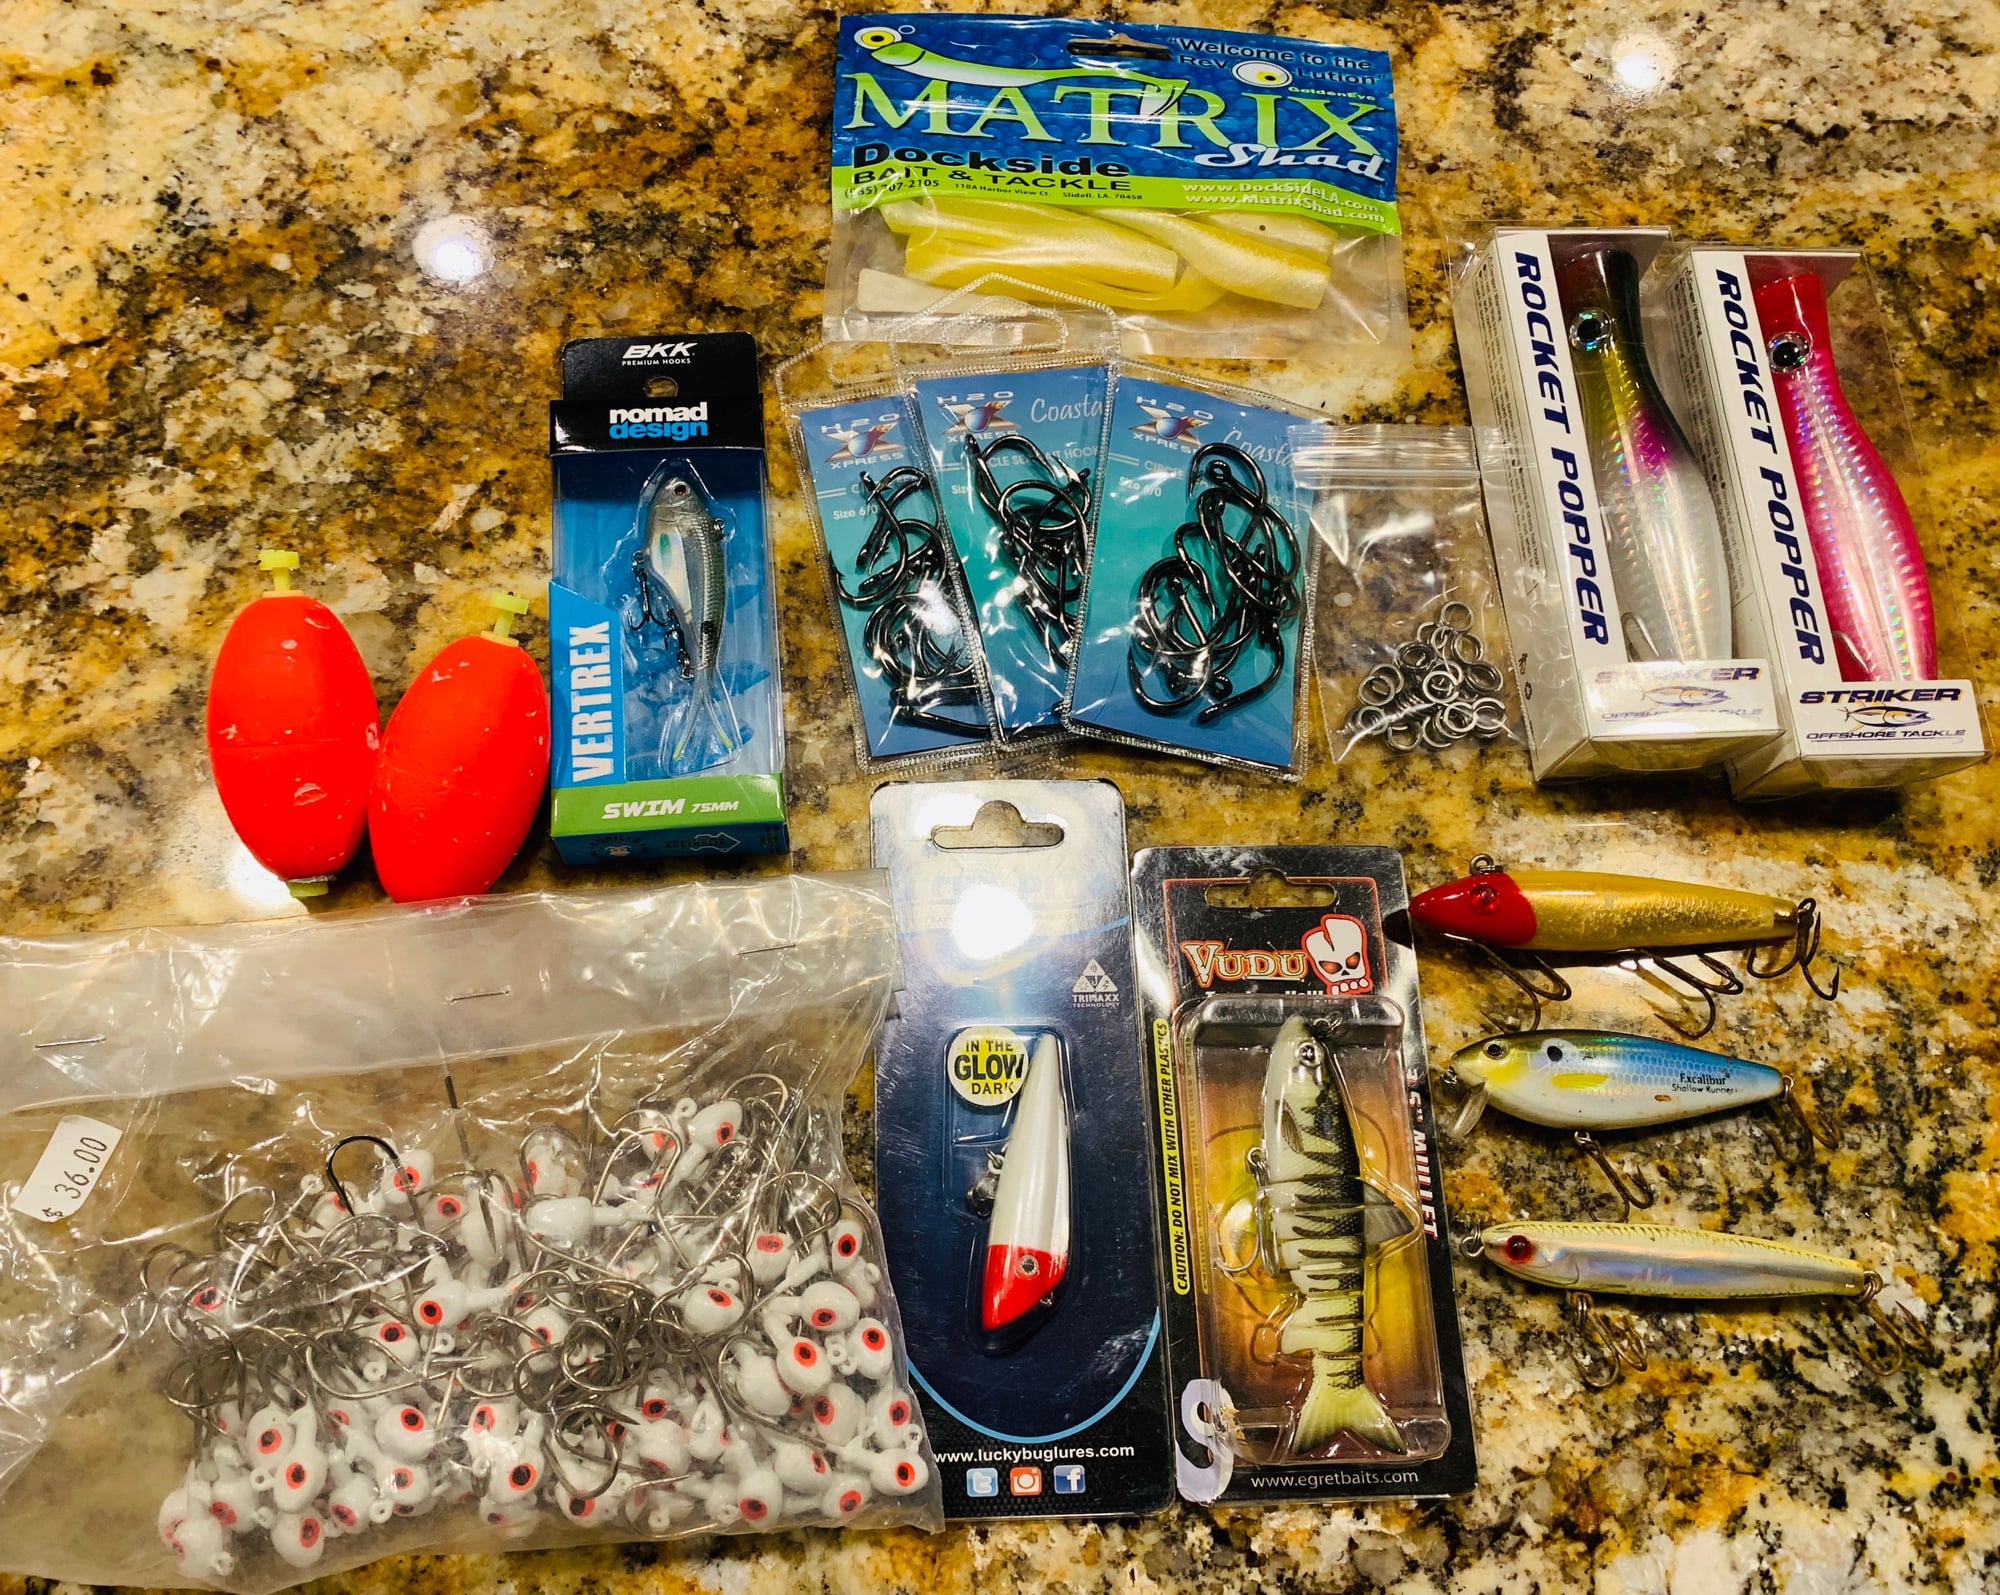 NLBN and nomad lures - The Hull Truth - Boating and Fishing Forum